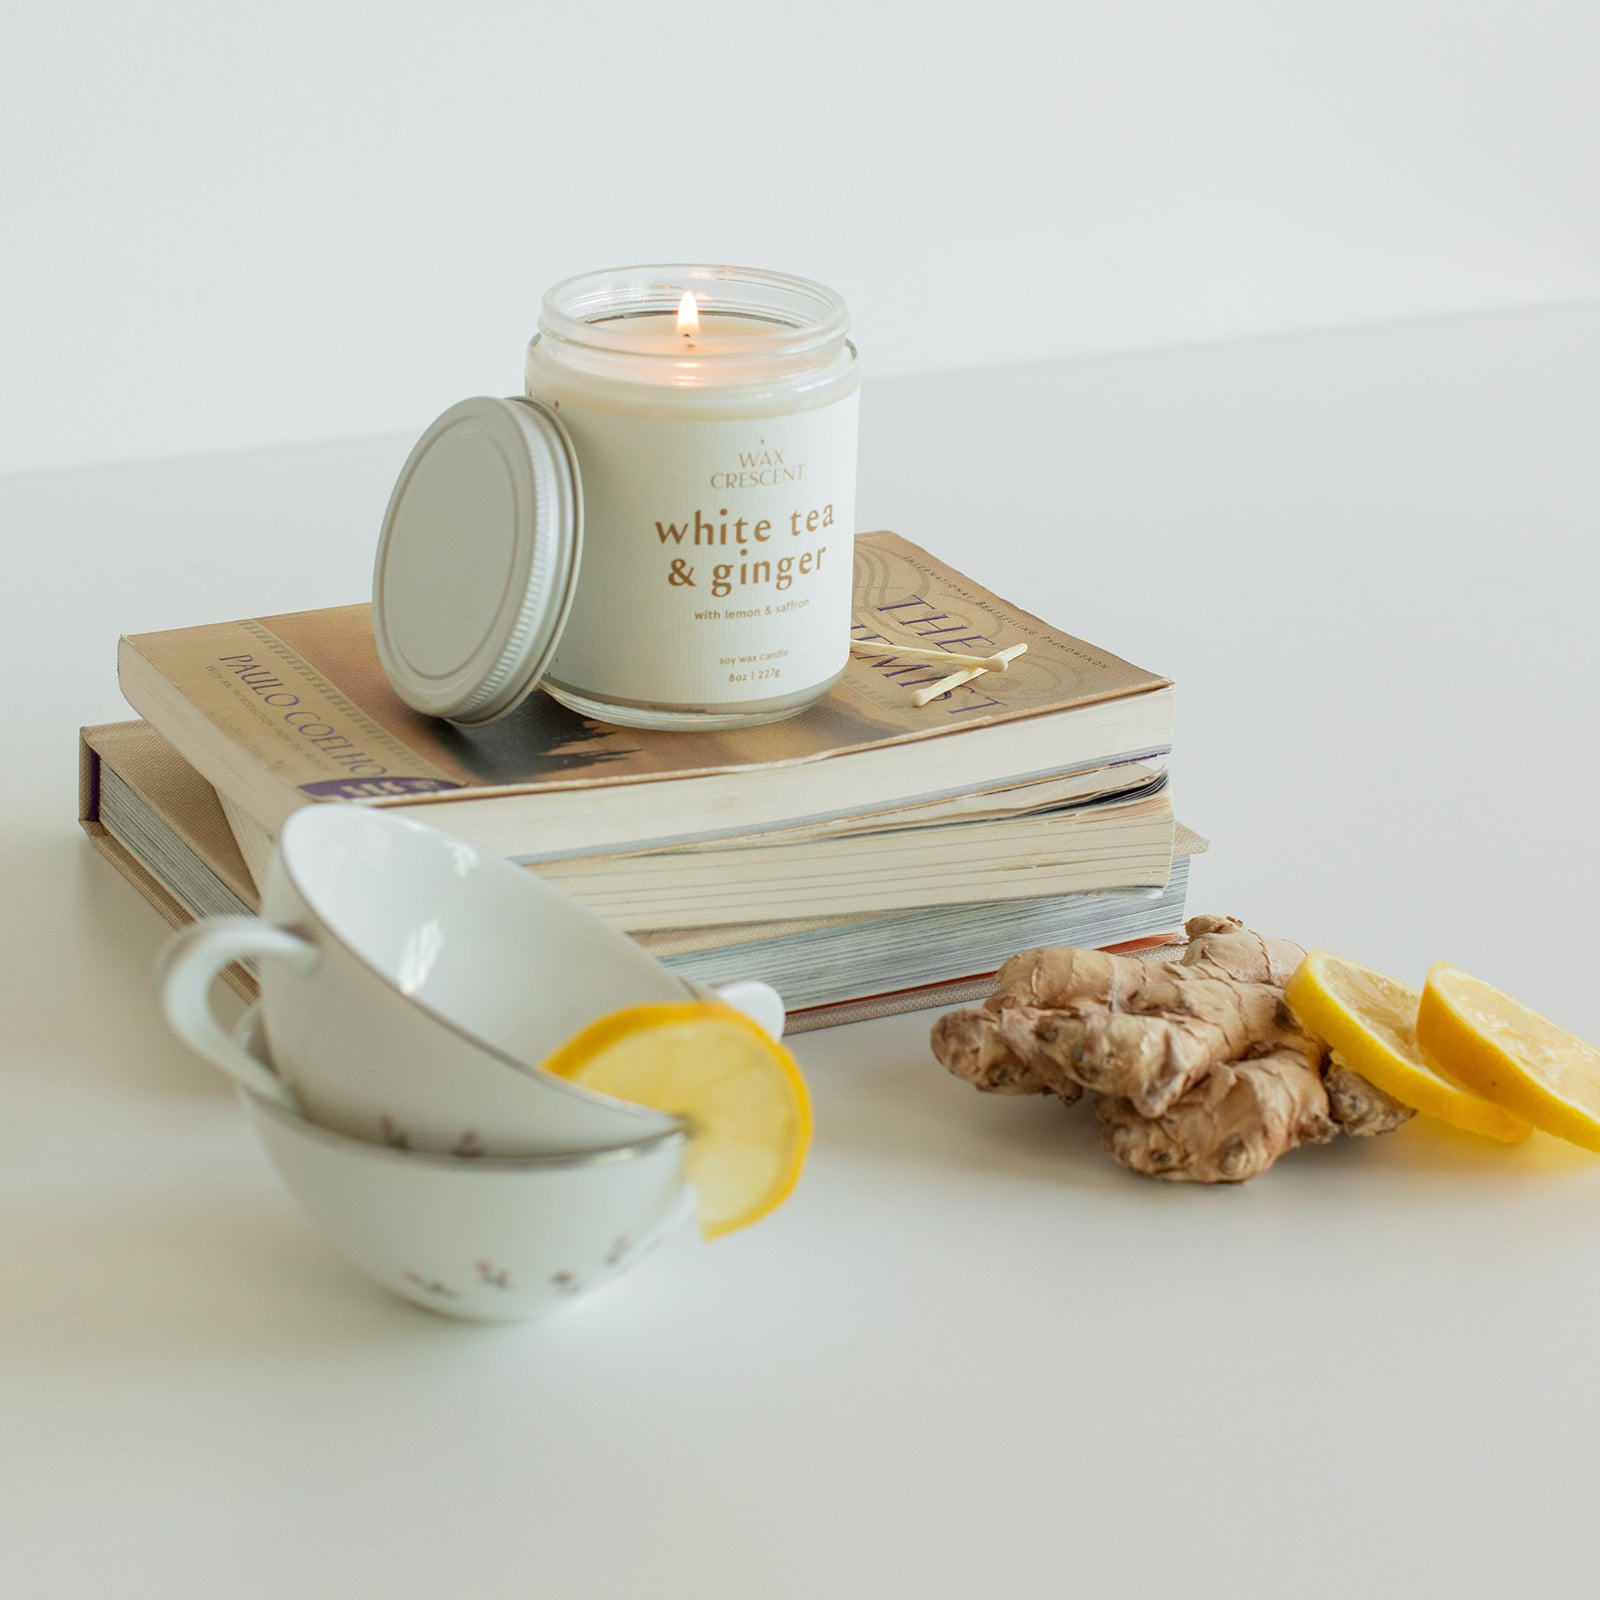 Wax Crescent nontoxic soy candle made with luxury ingredients